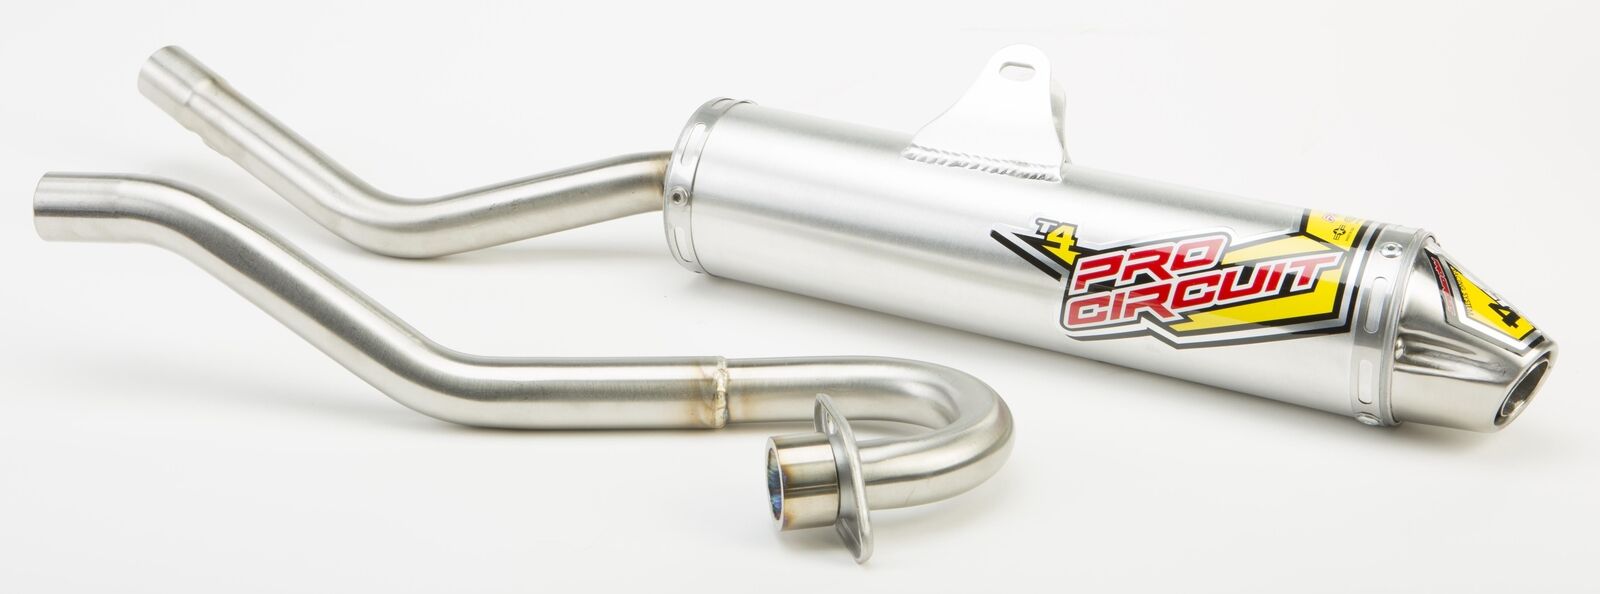 Pro Circuit T-4 Full Exhaust System for Honda CRF150F CRF 150 F 06-17 4H06150